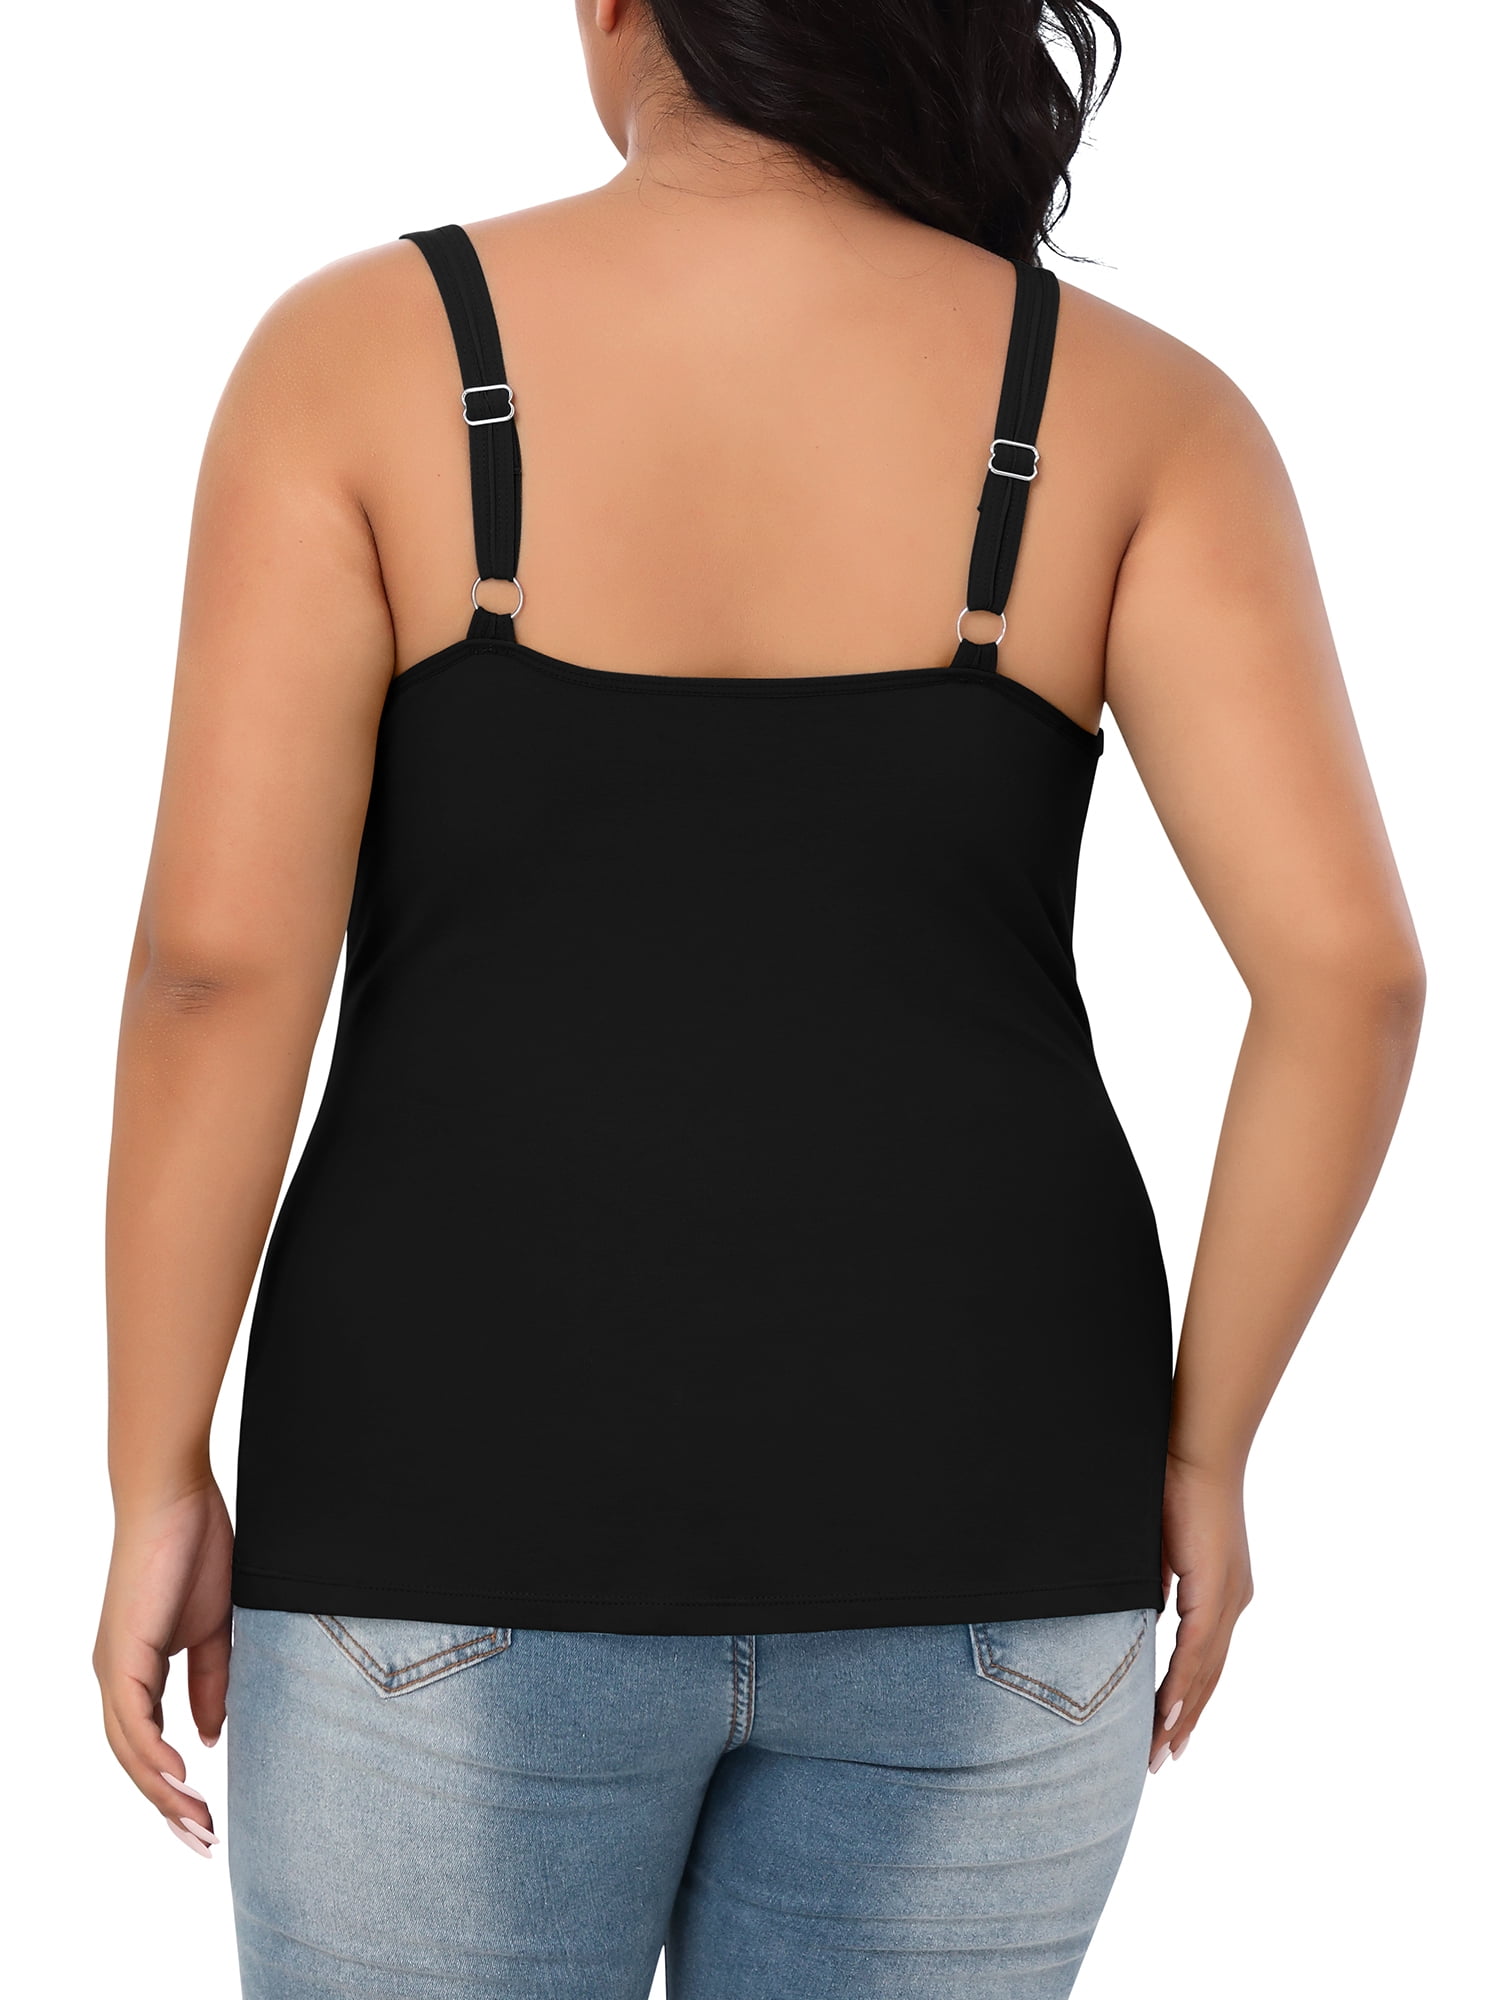 Buy SHAPERX Women's Organic Cotton Camisole Tank Top with Built-in Shelf  Bra Plus Size Pack of 1 (2XL, Black) at